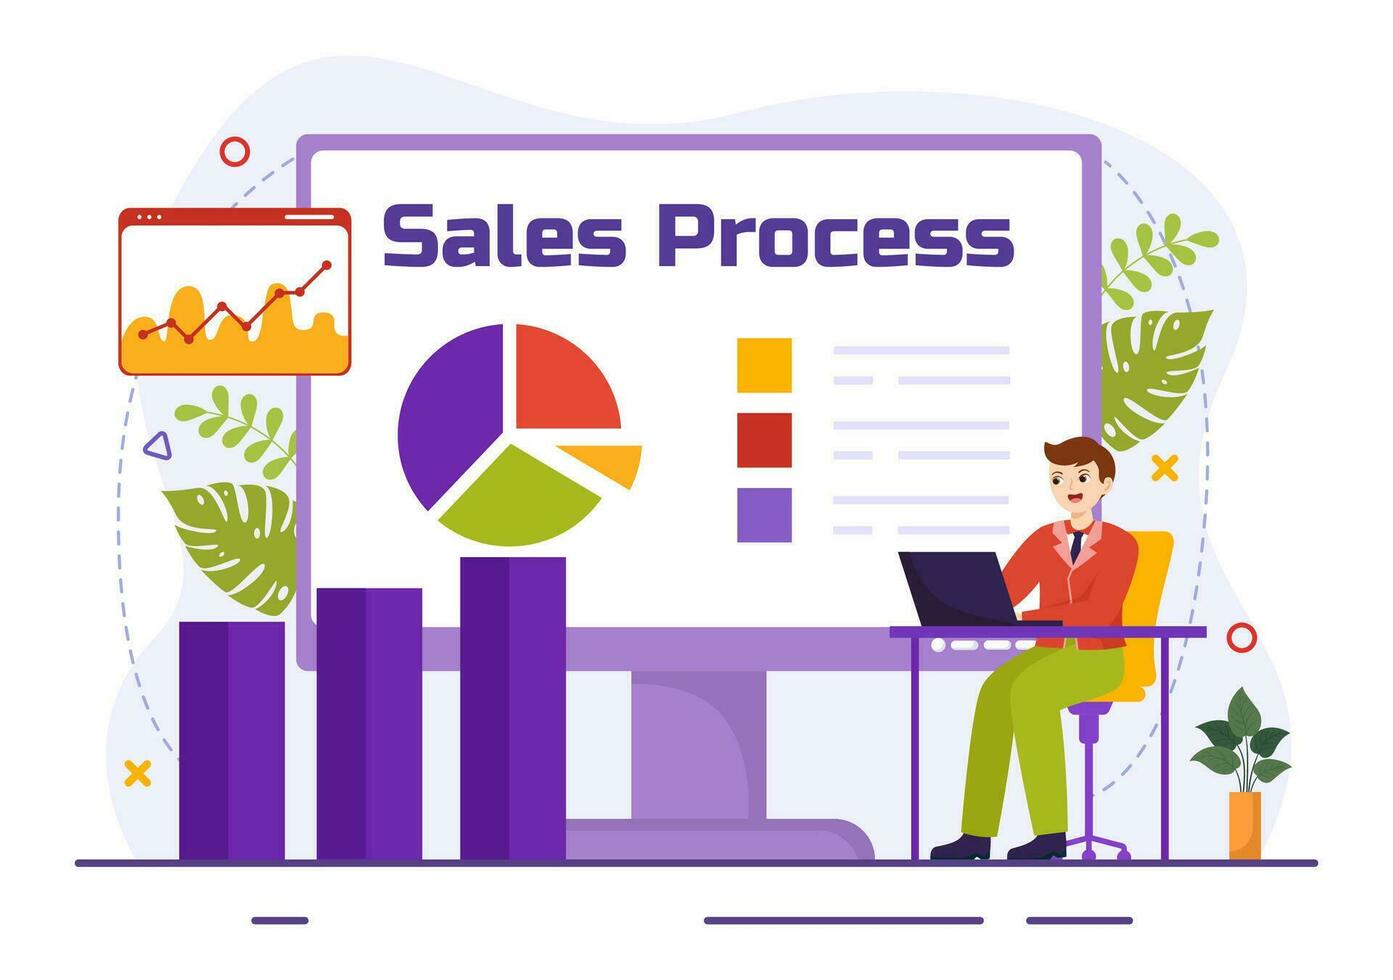 Sales Process Vector Illustration with Steps of Communication for Attracting New Customers and Making profit in Business Strategy Flat Background